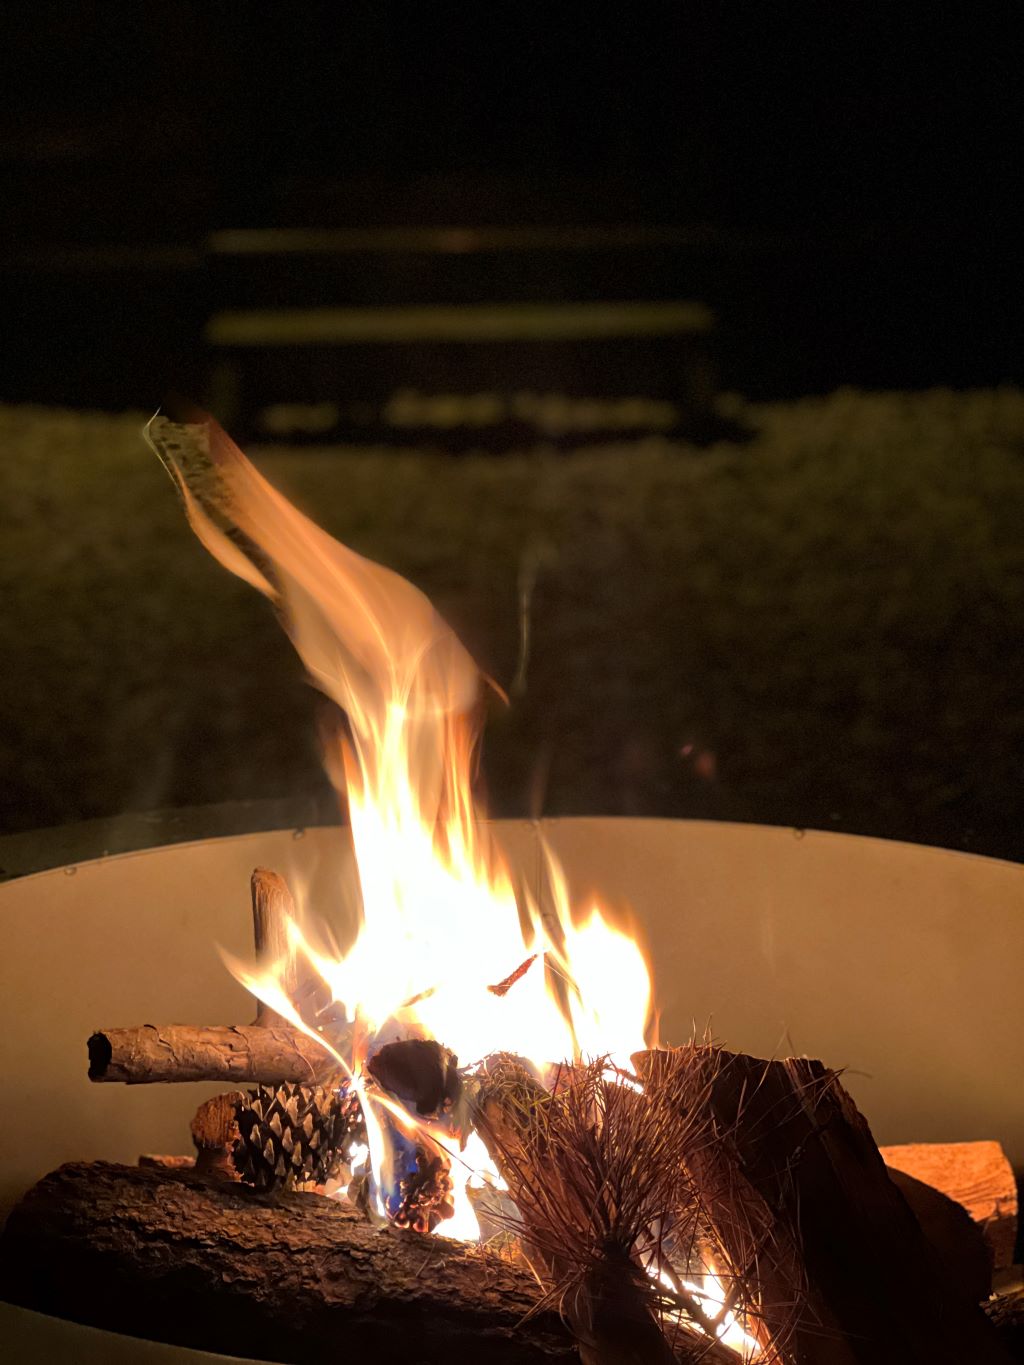 10 Safety Tips for a Safe, Cozy Fire